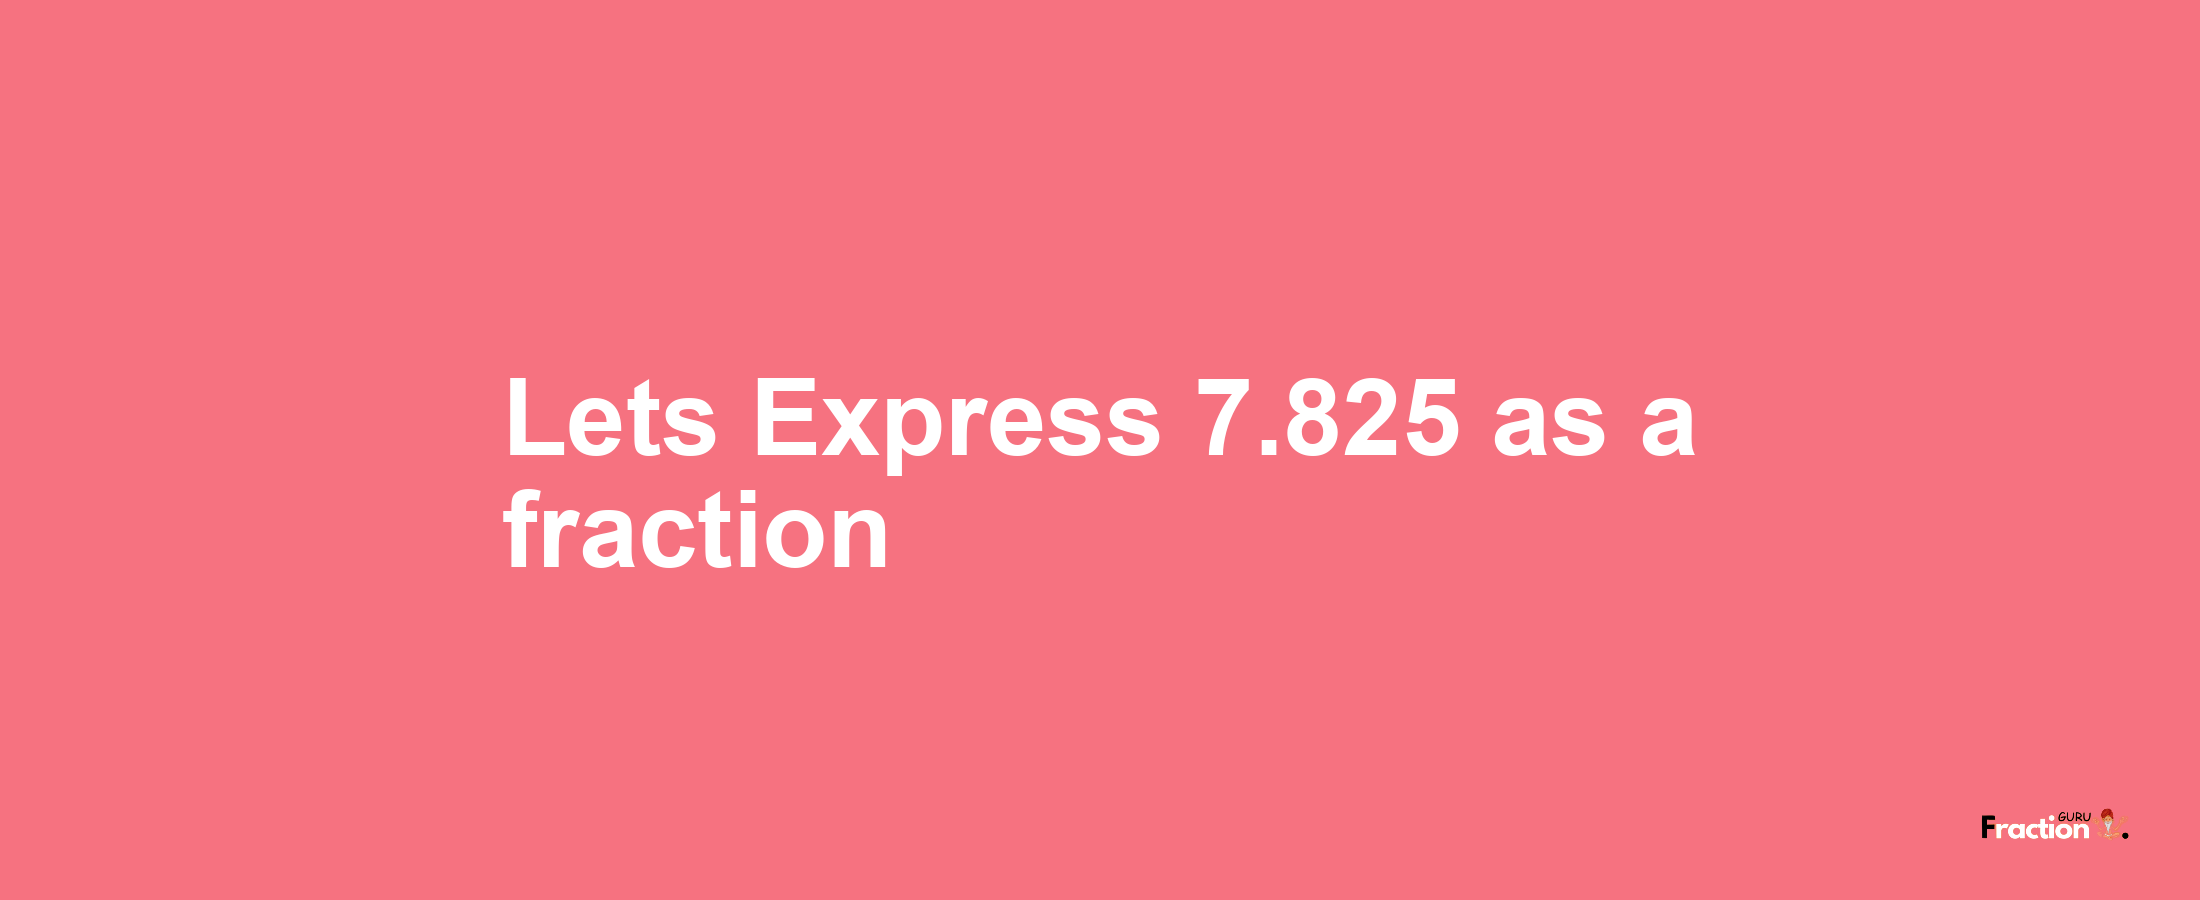 Lets Express 7.825 as afraction